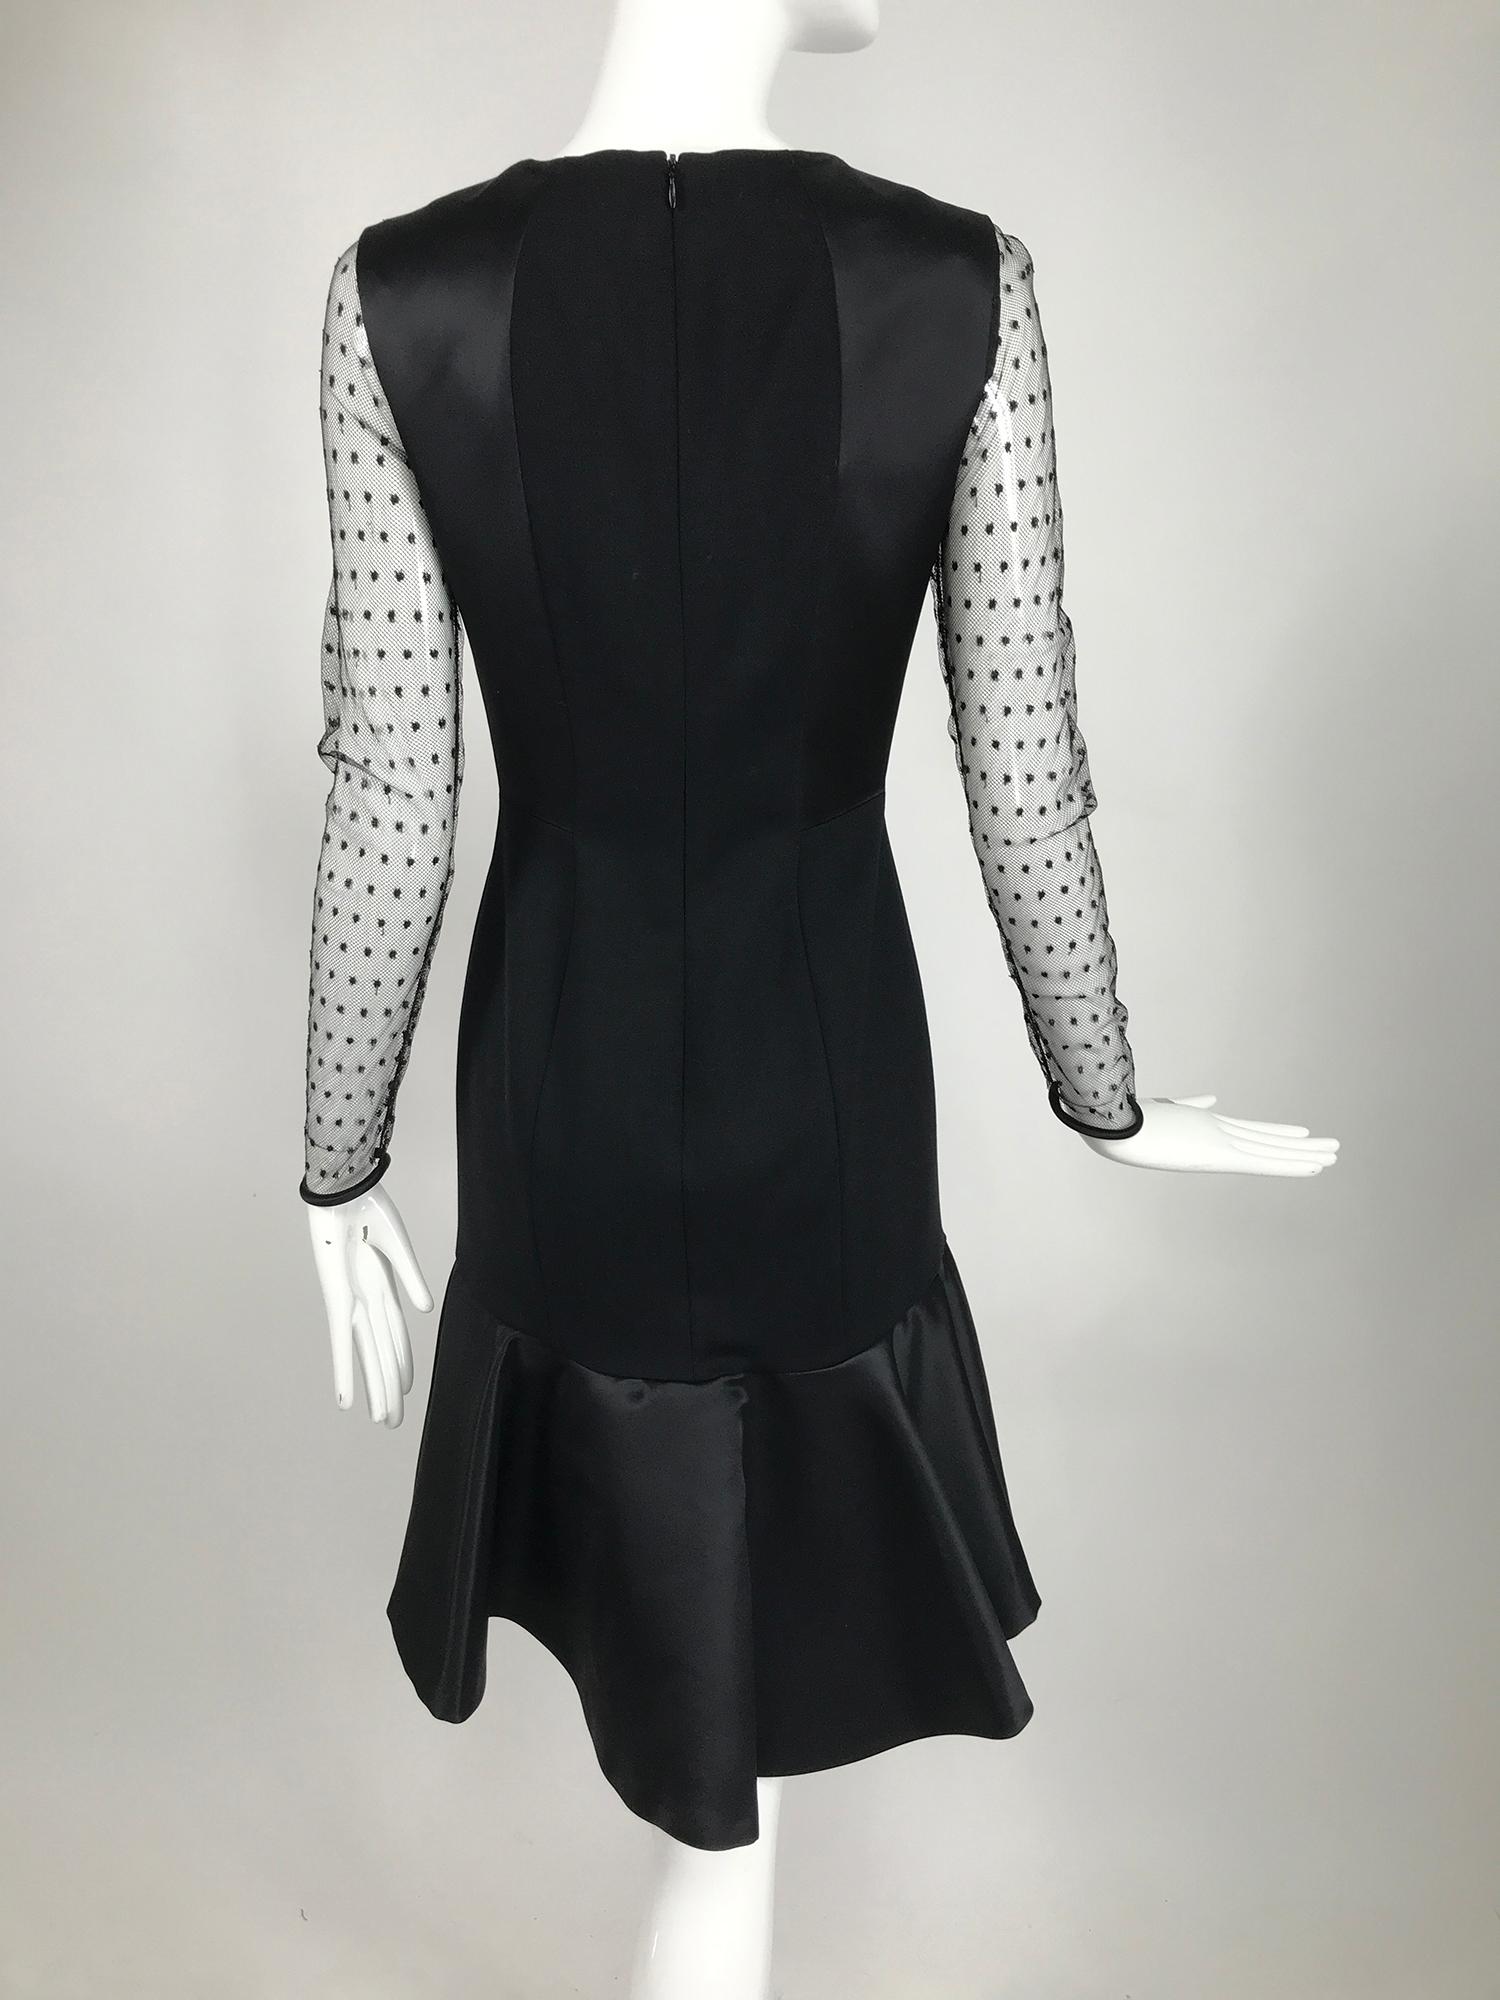 Etro Black Cocktail Dress with Dotted Tulle Sleeves and Satin Hem In Excellent Condition For Sale In West Palm Beach, FL